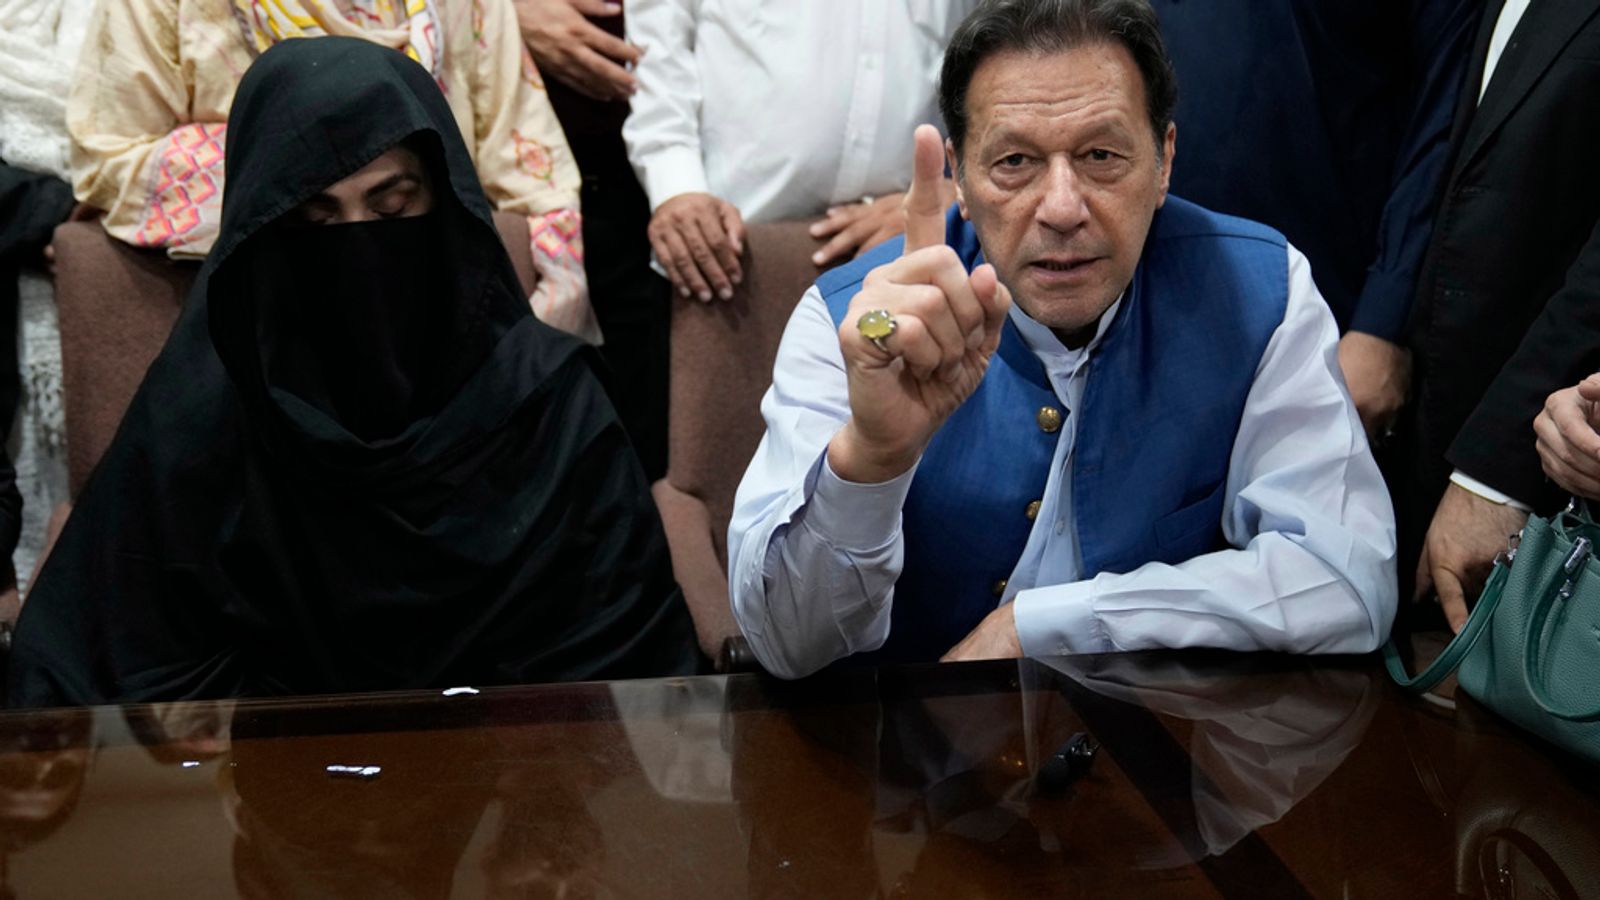 Former Pakistan Prime Minister Imran Khan and Wife Sentenced to Prison for Violating Marriage Law